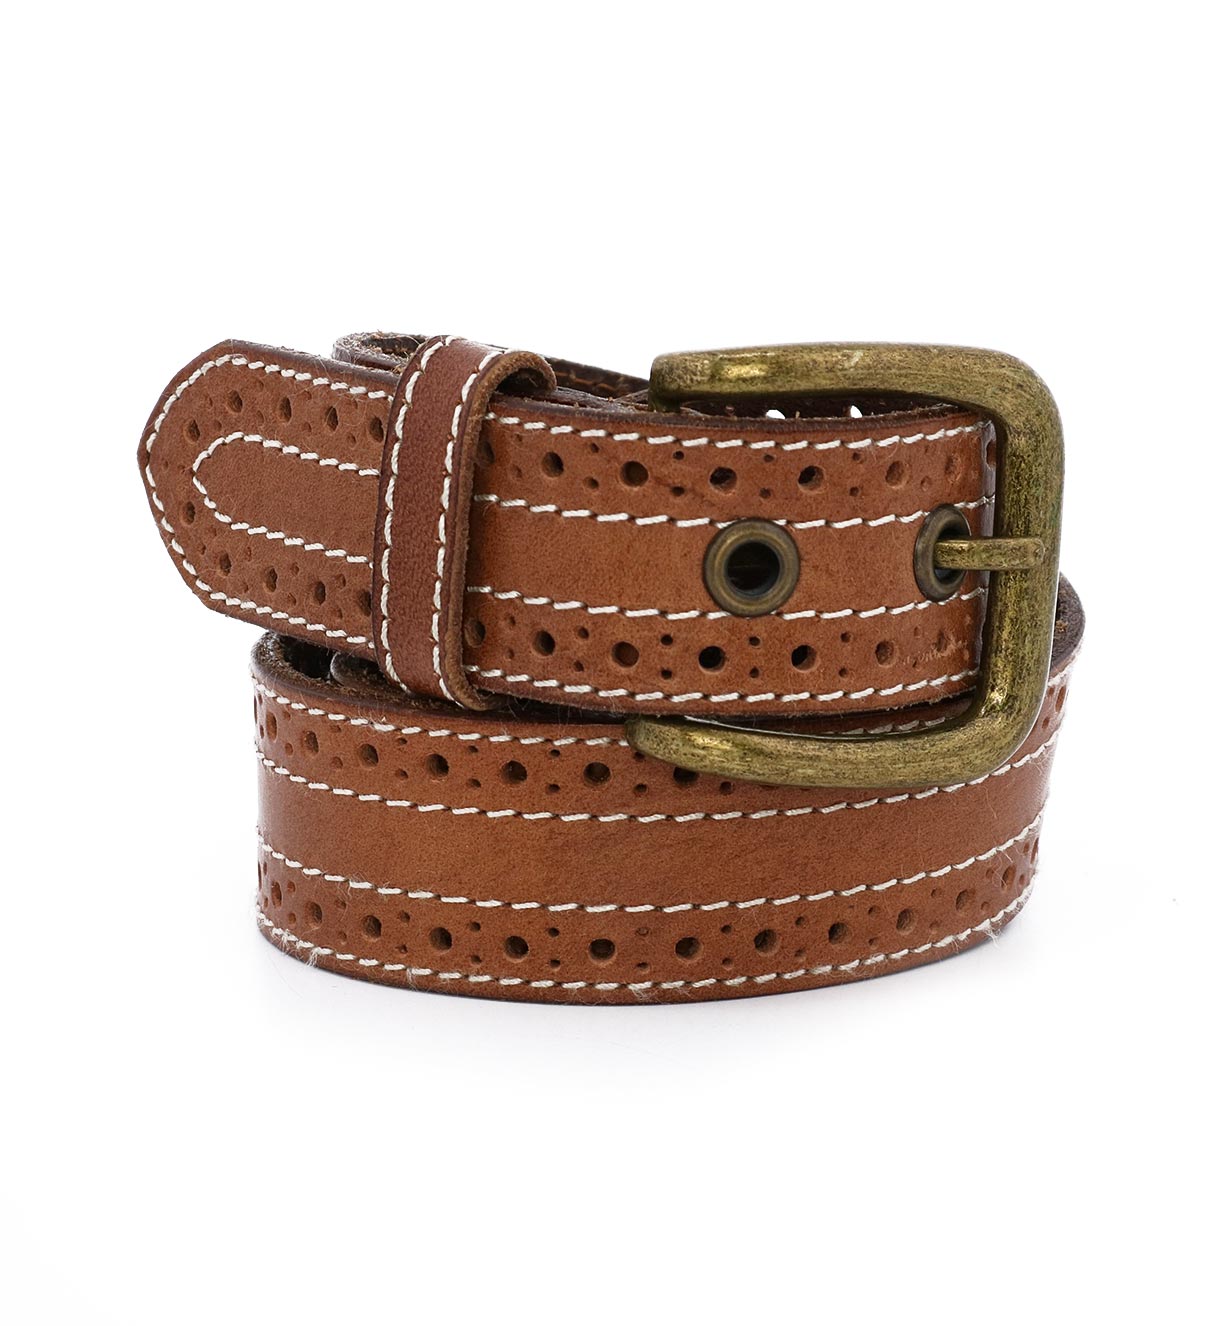 A Addison leather belt with a brass buckle and silver grommets by Bed Stu.